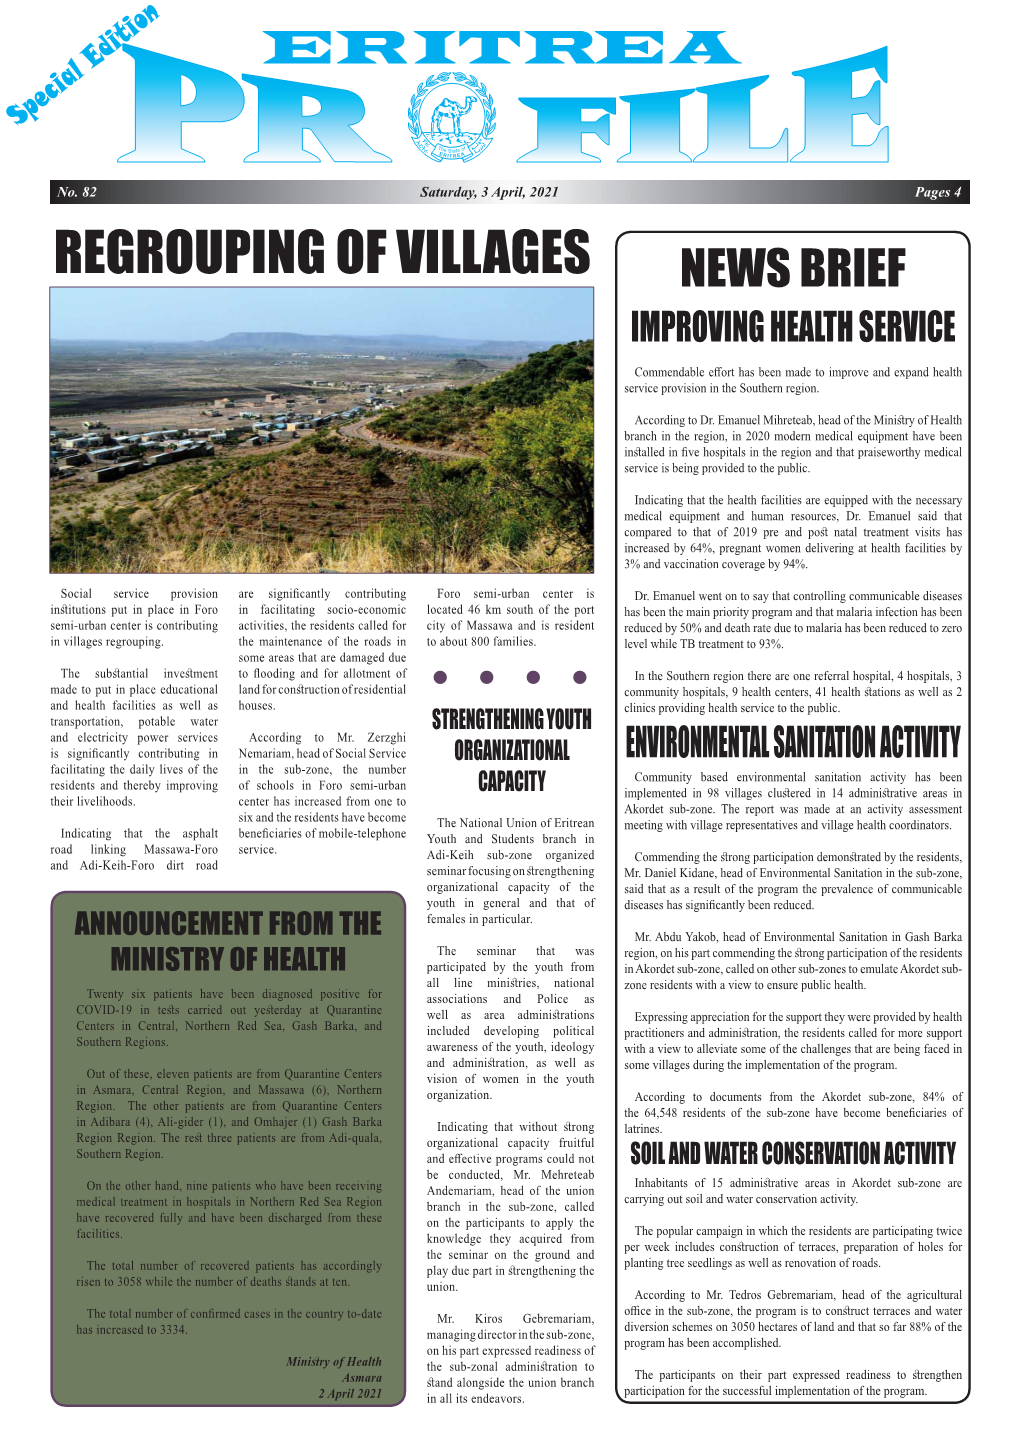 Regrouping of Villages News Brief Improving Health Service Commendable Effort Has Been Made to Improve and Expand Health Service Provision in the Southern Region